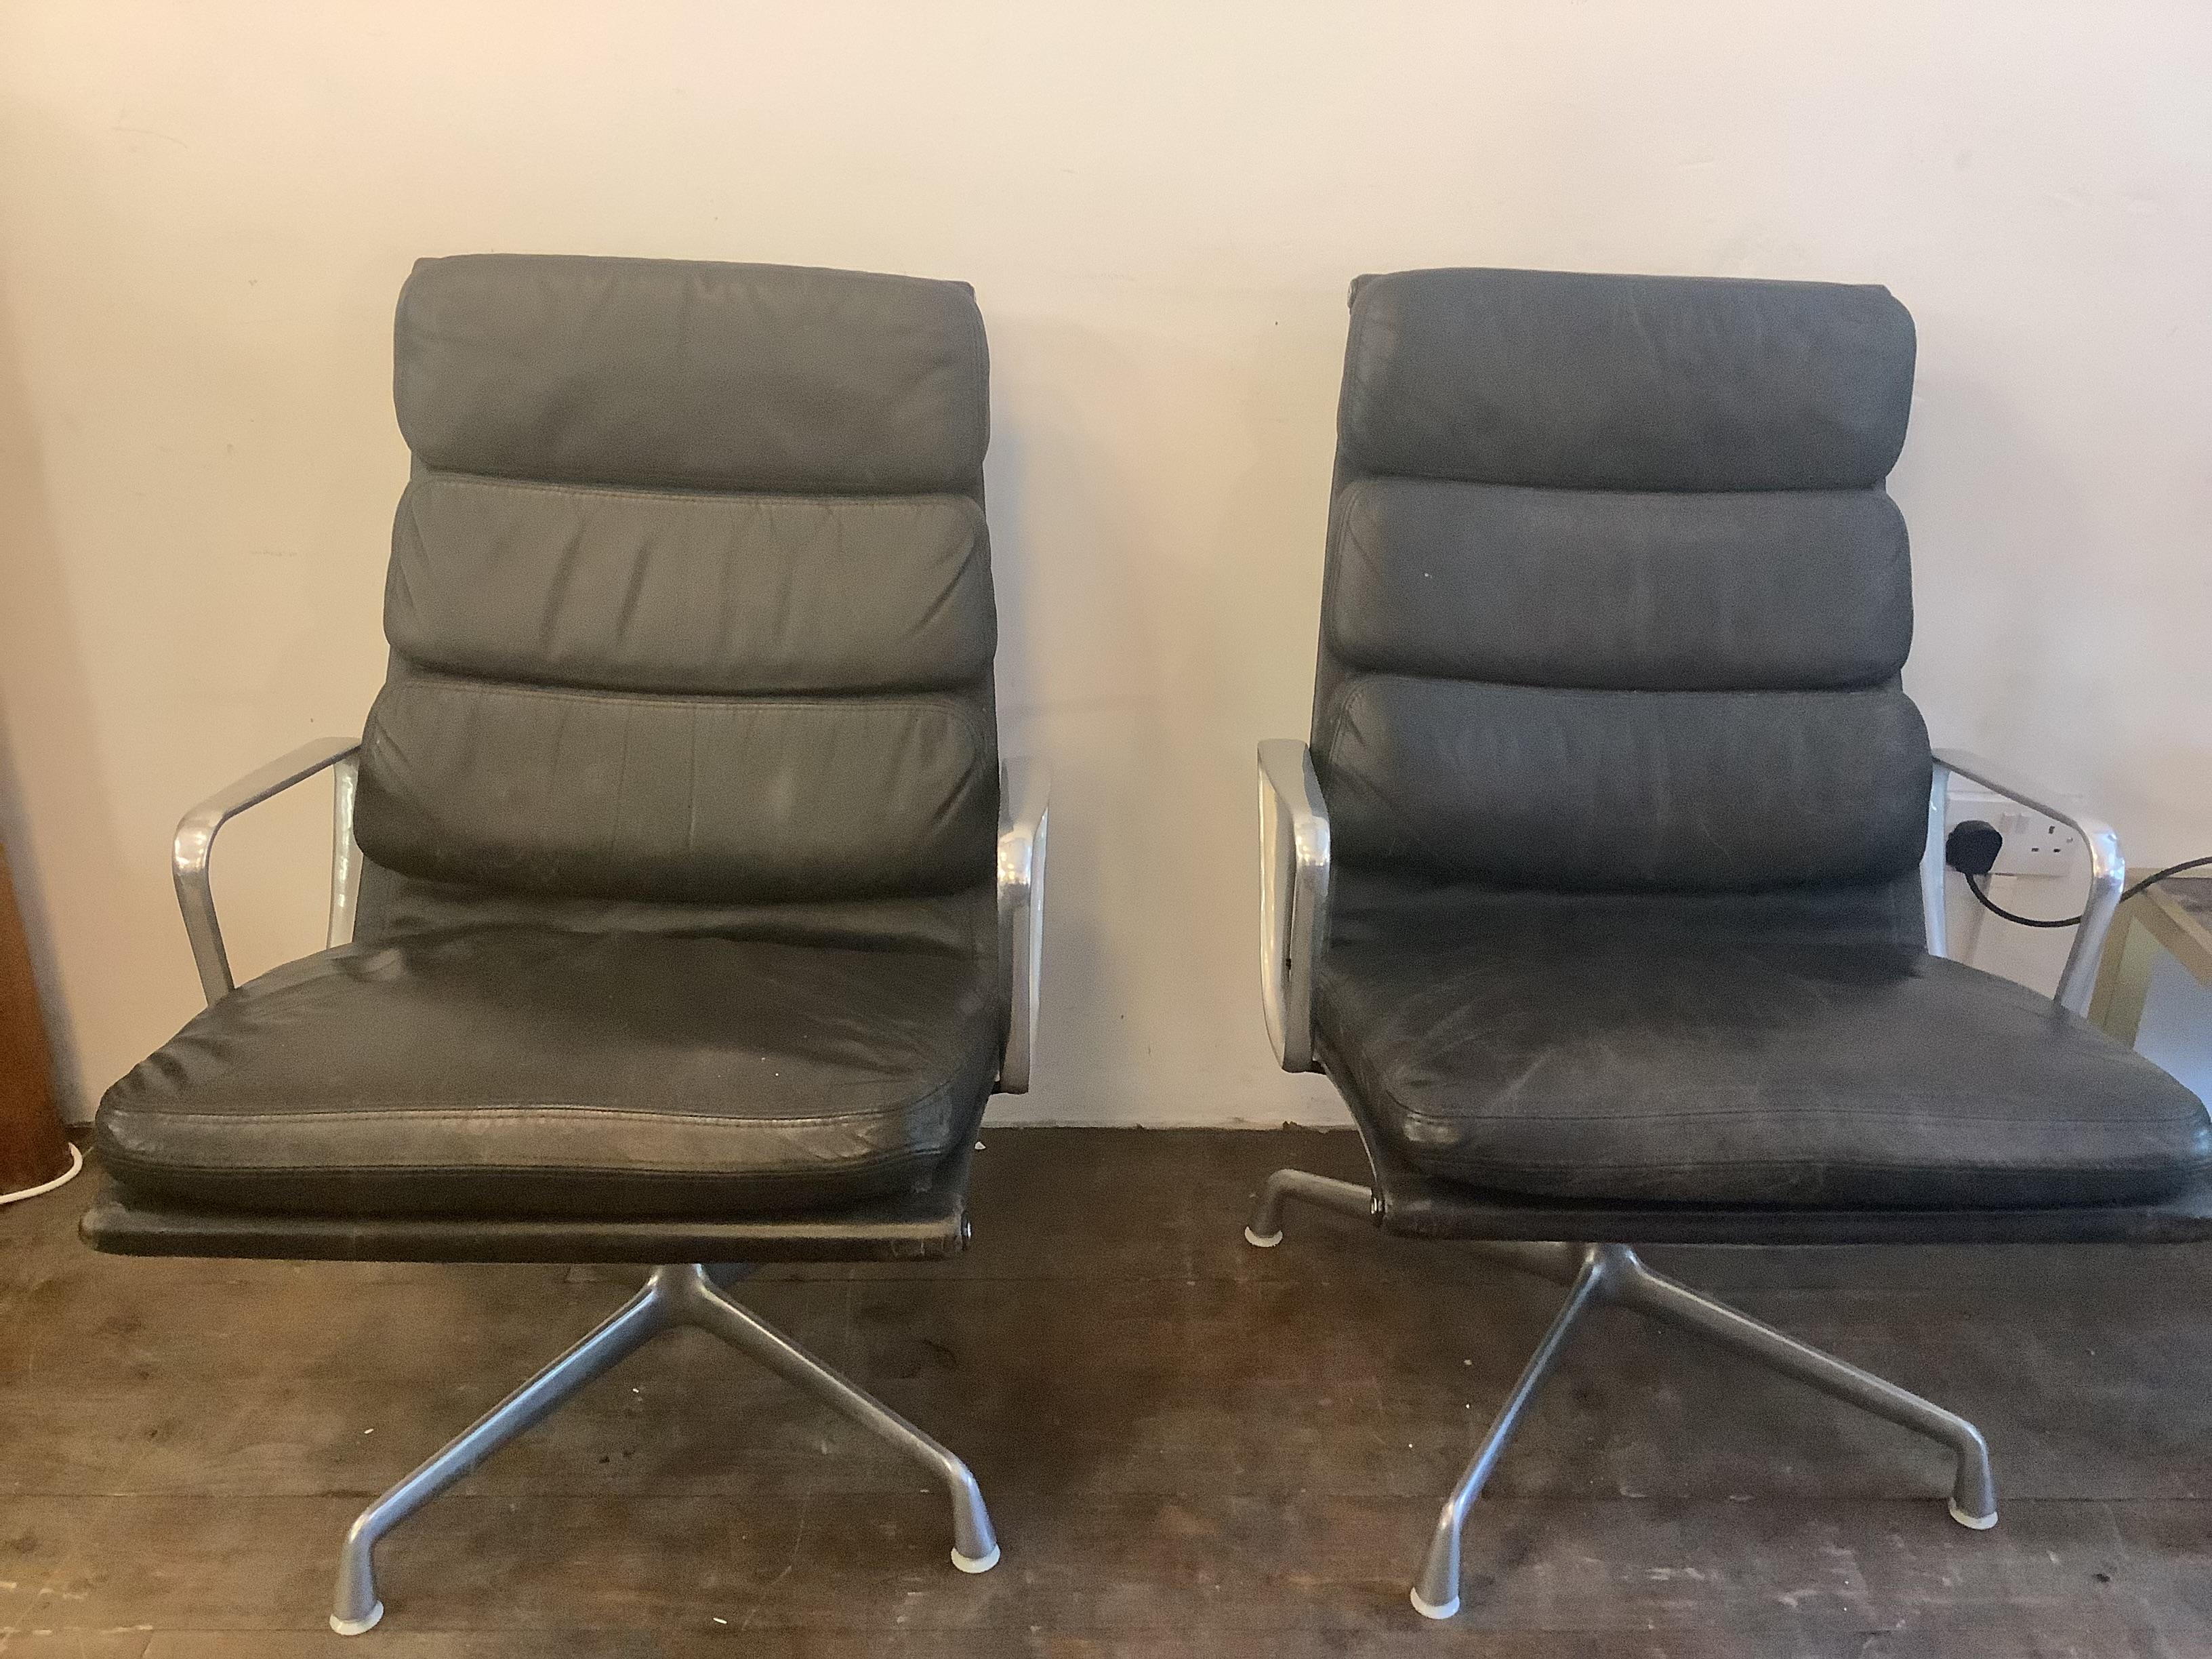 Original designed in 1958 with much R&D development this is a design to work with the shape of the seater’s

body super comfortable.The chair featured elegant sculptural one piece cast aluminium side frame between which 

upholstery was slung.A